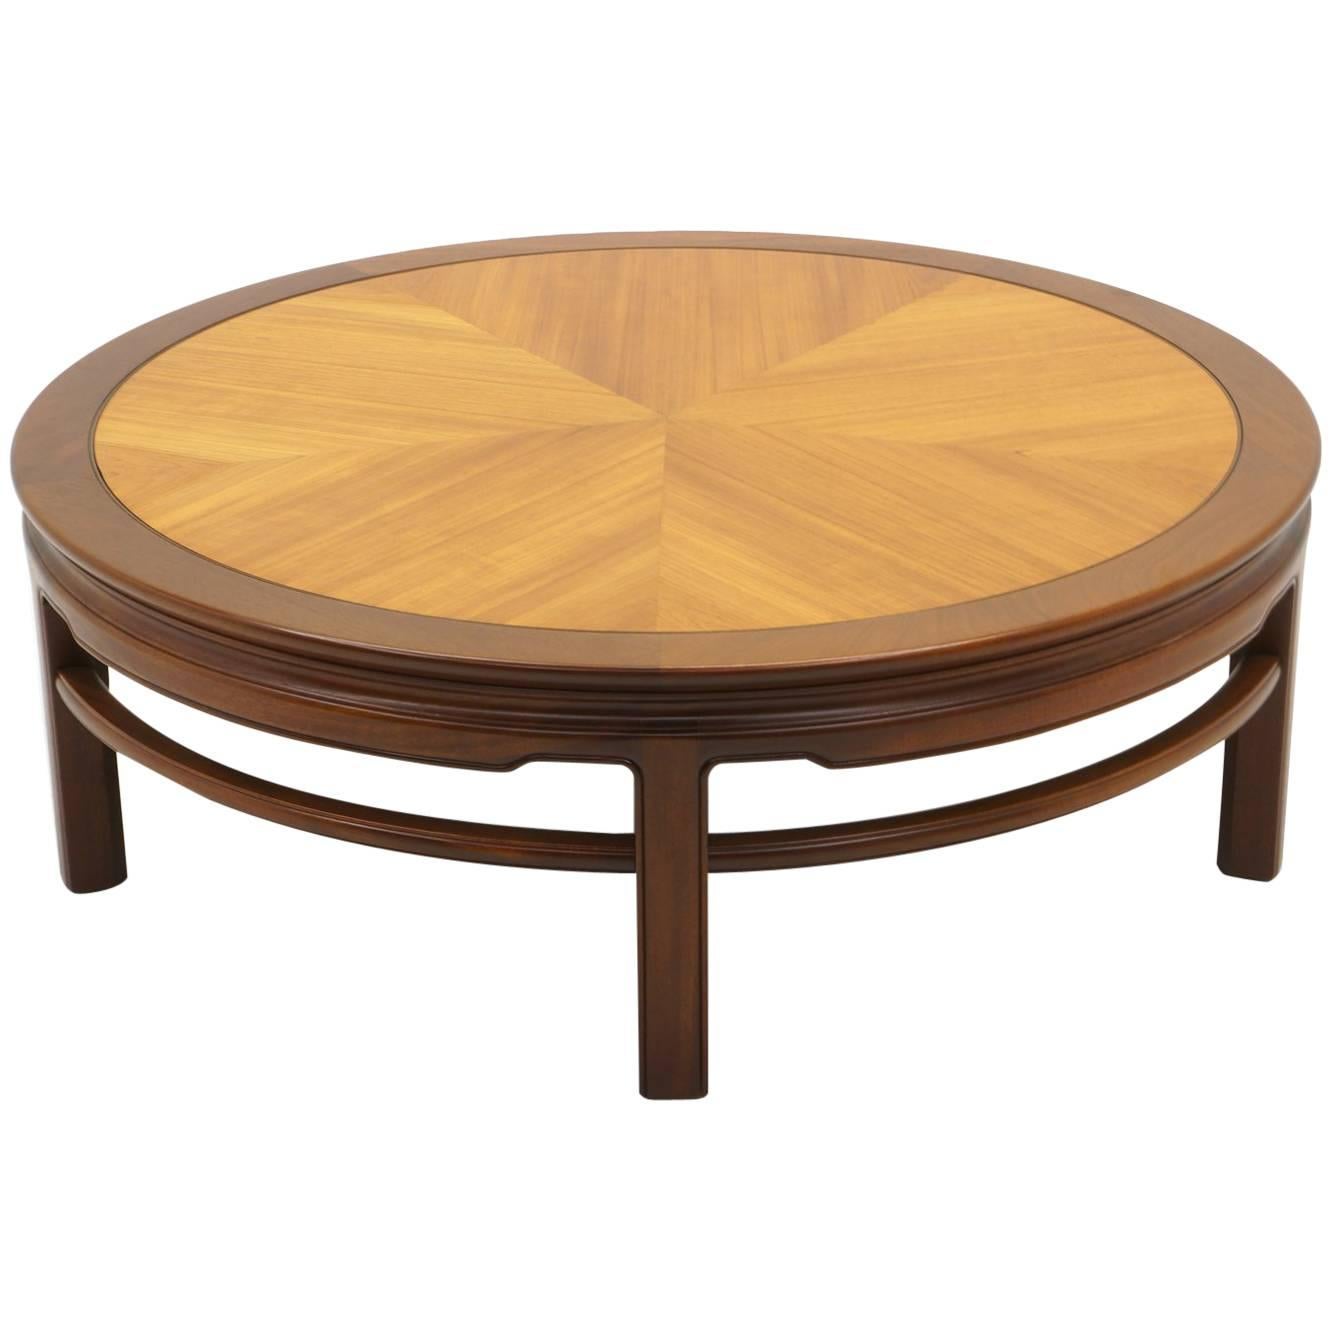 Round Coffee Table by Kittinger, Two-Toned Teak and Mahogany, Expertly Restored